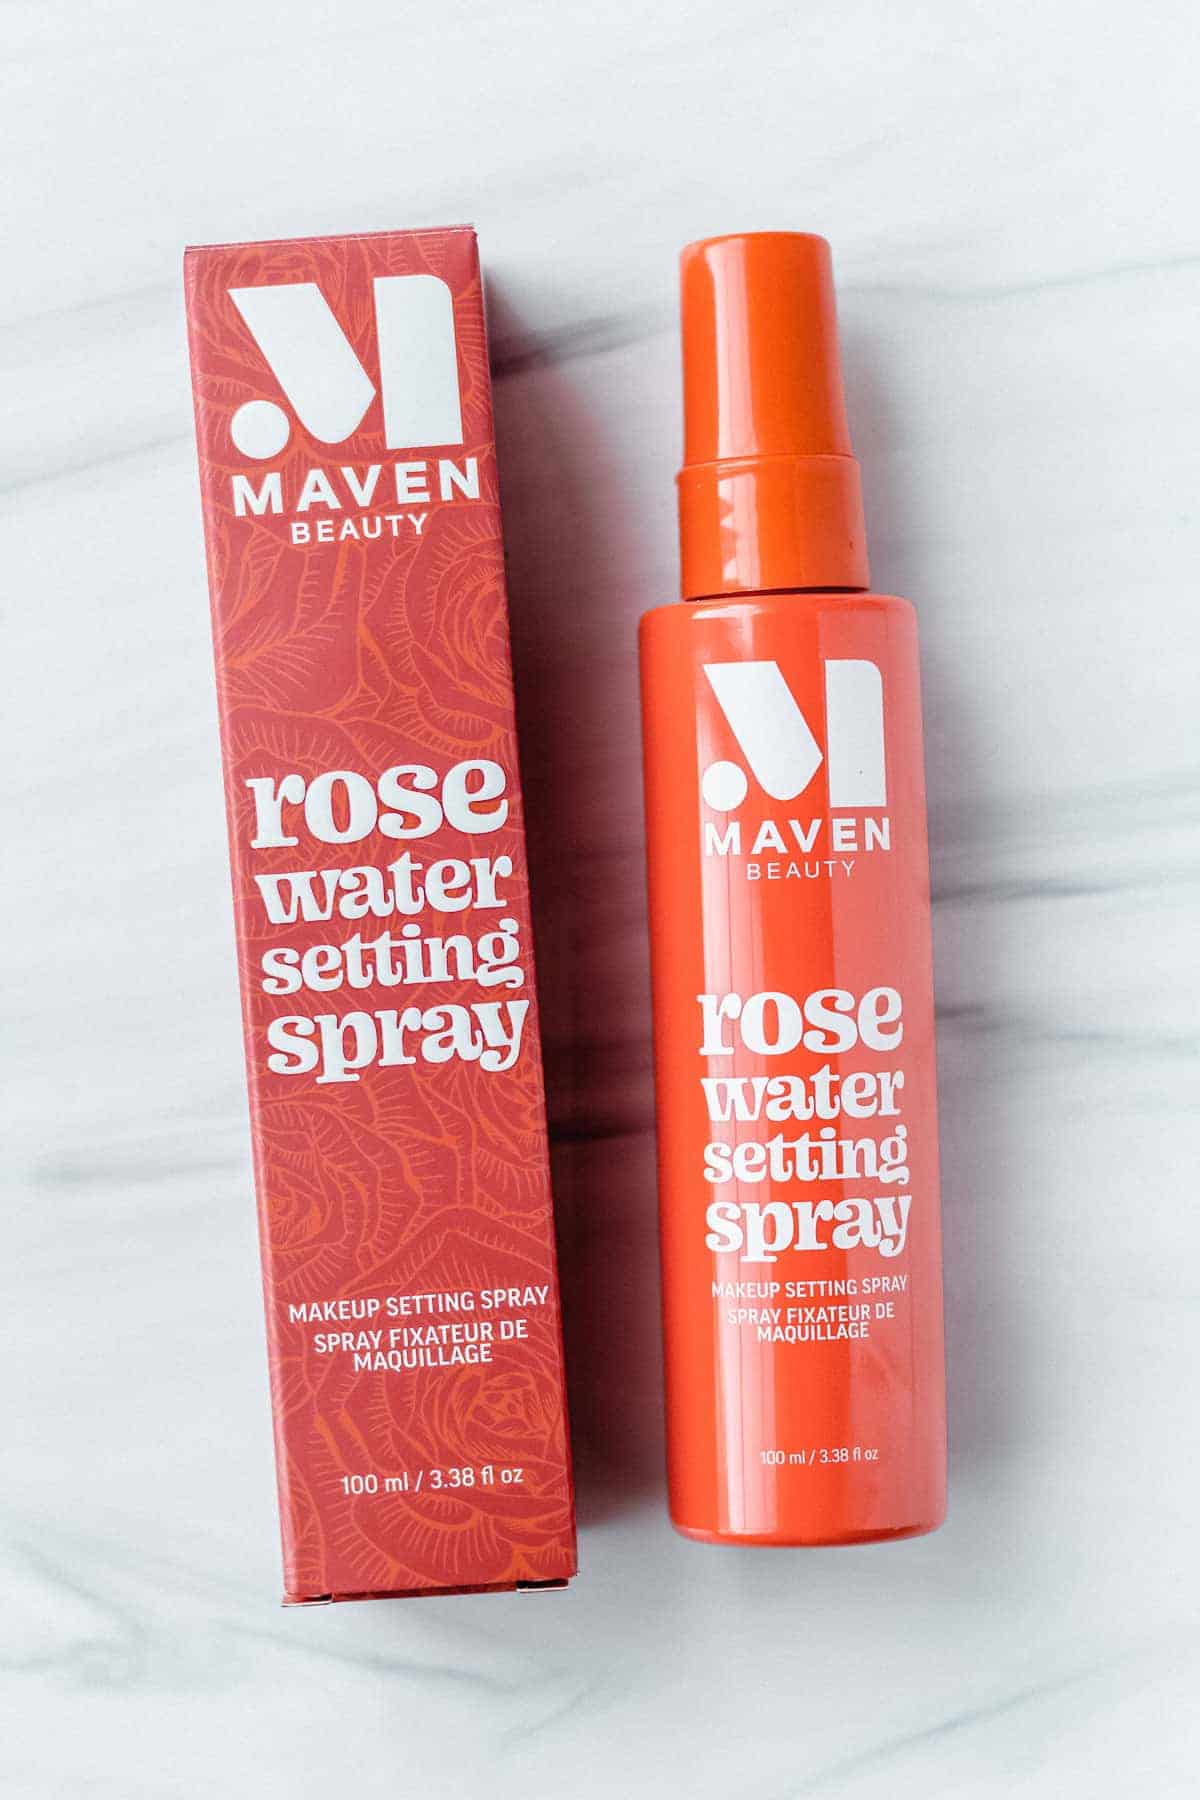 Maven Beauty Maven Rose Water Setting Spray bottle and box on a white background